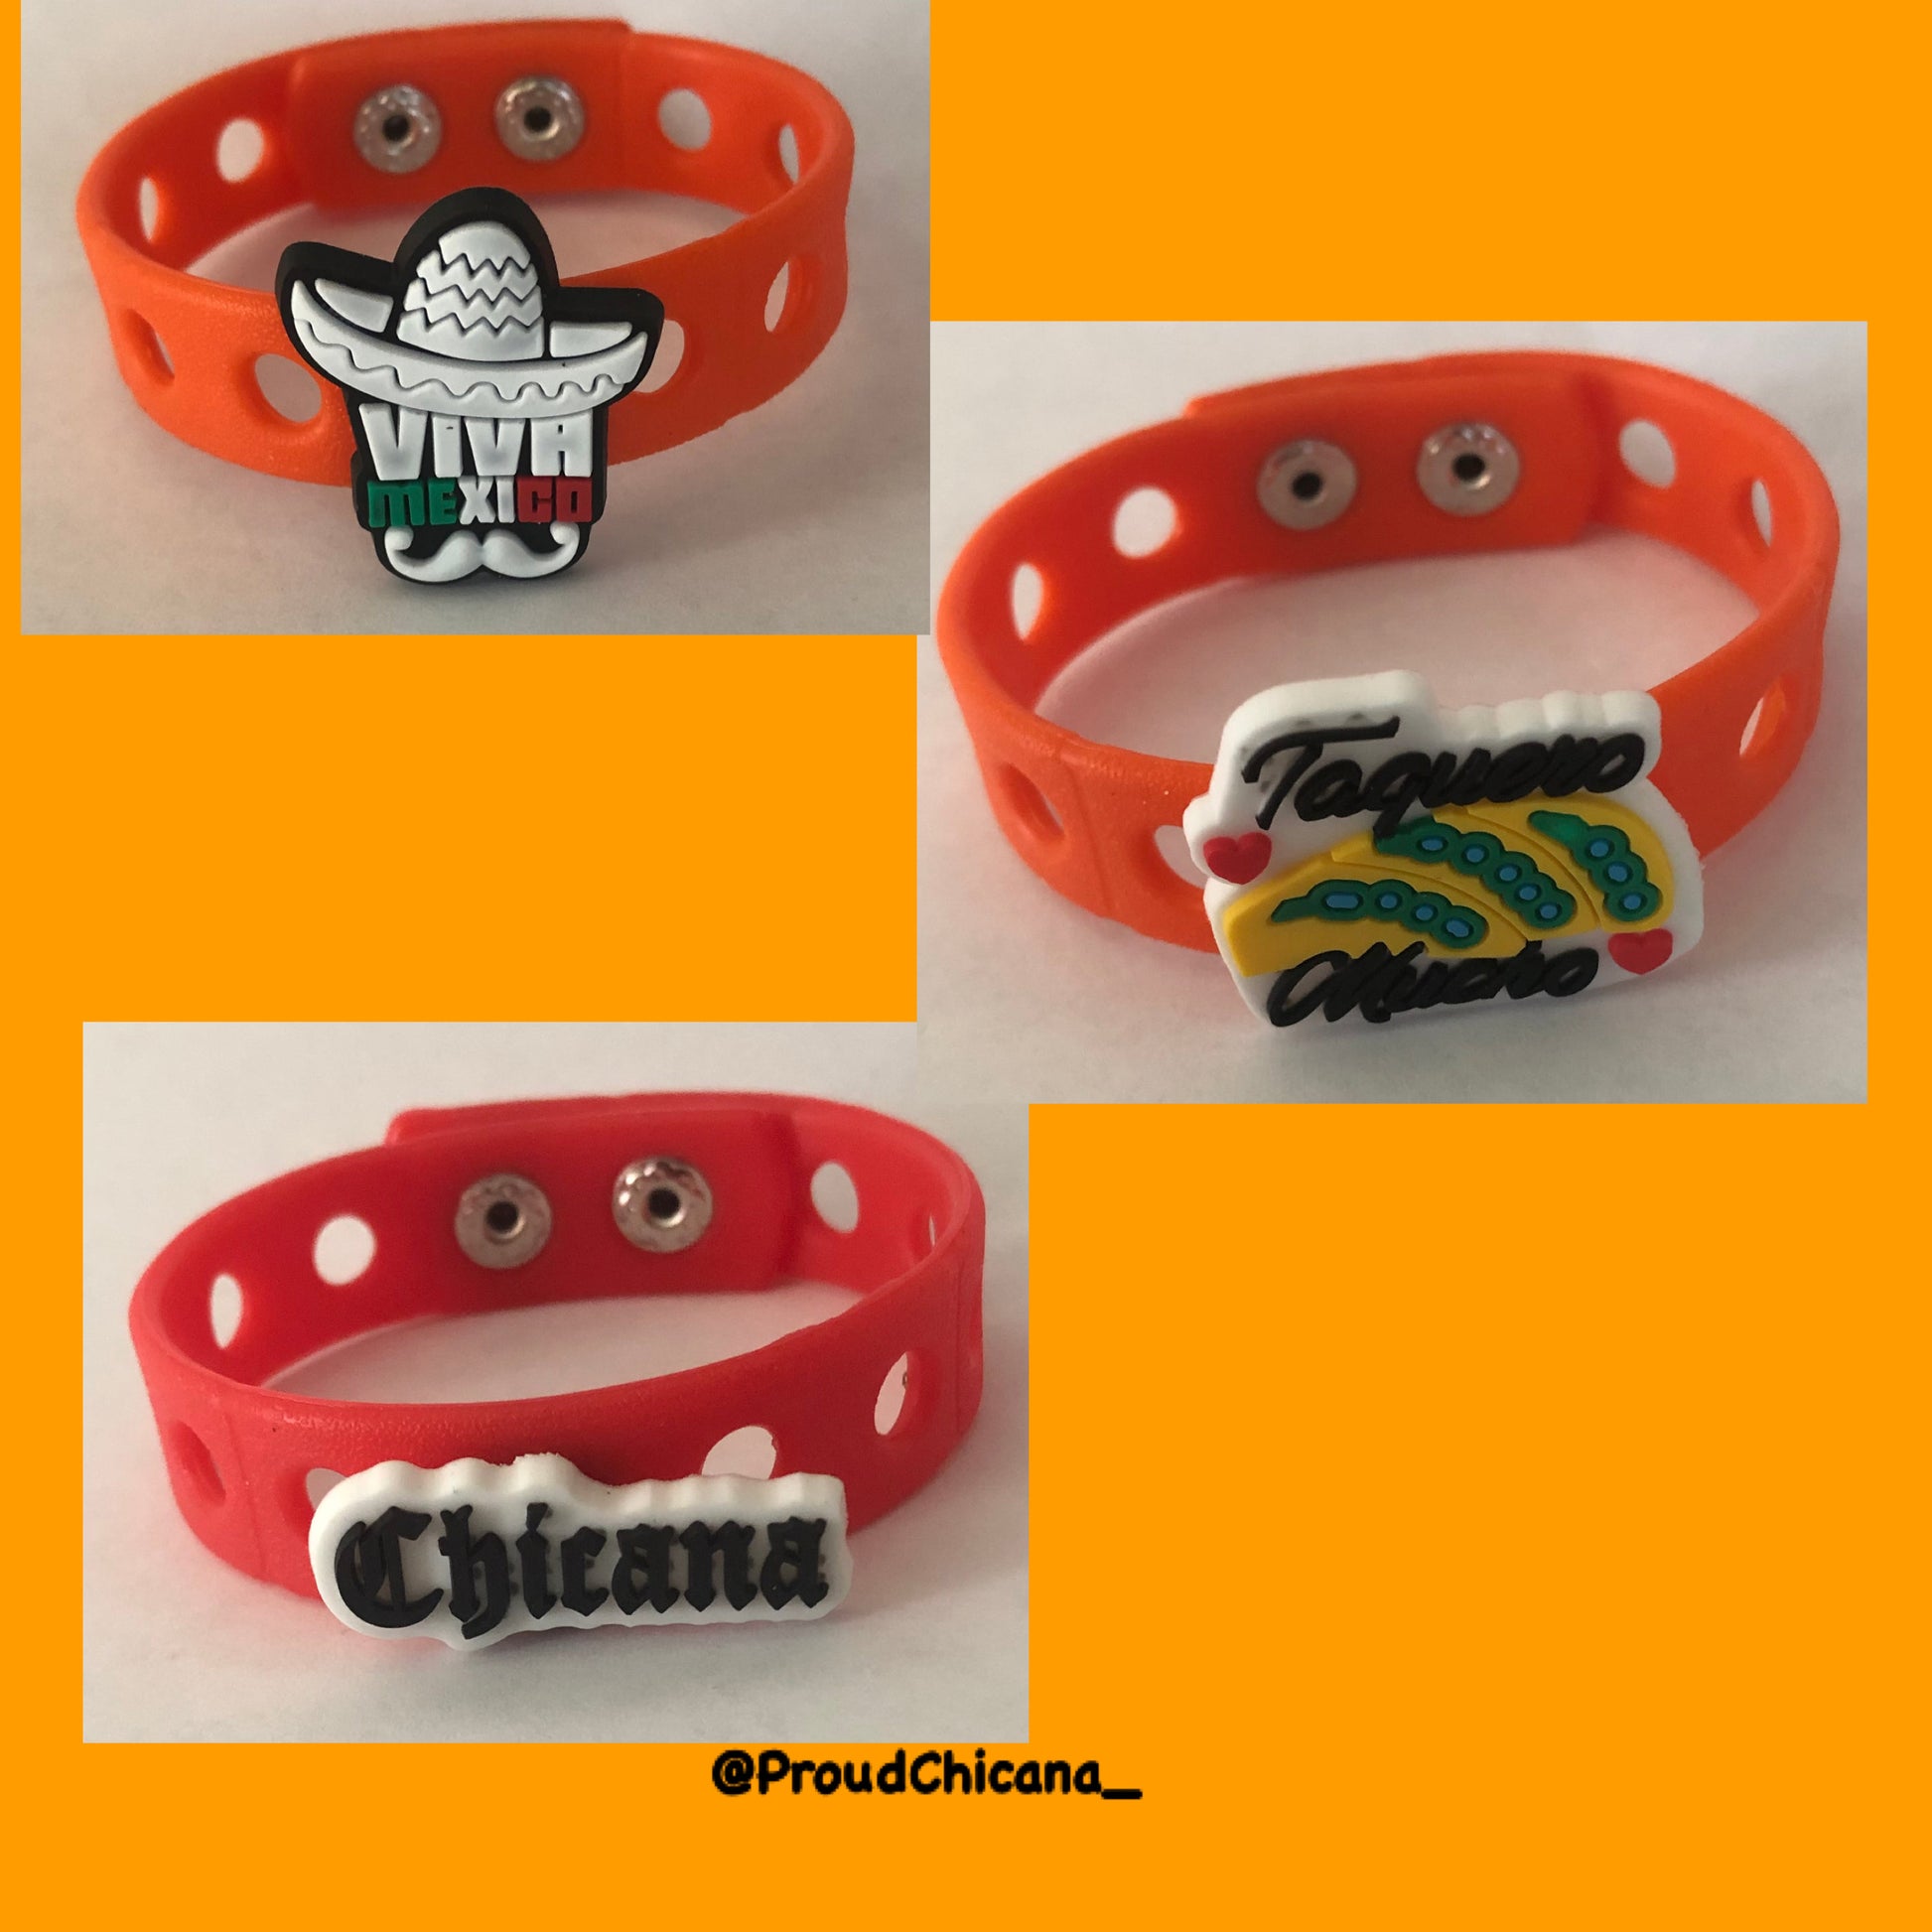 Croc charm bracelets  Latino, Mexican, and Chicano charms – Proud